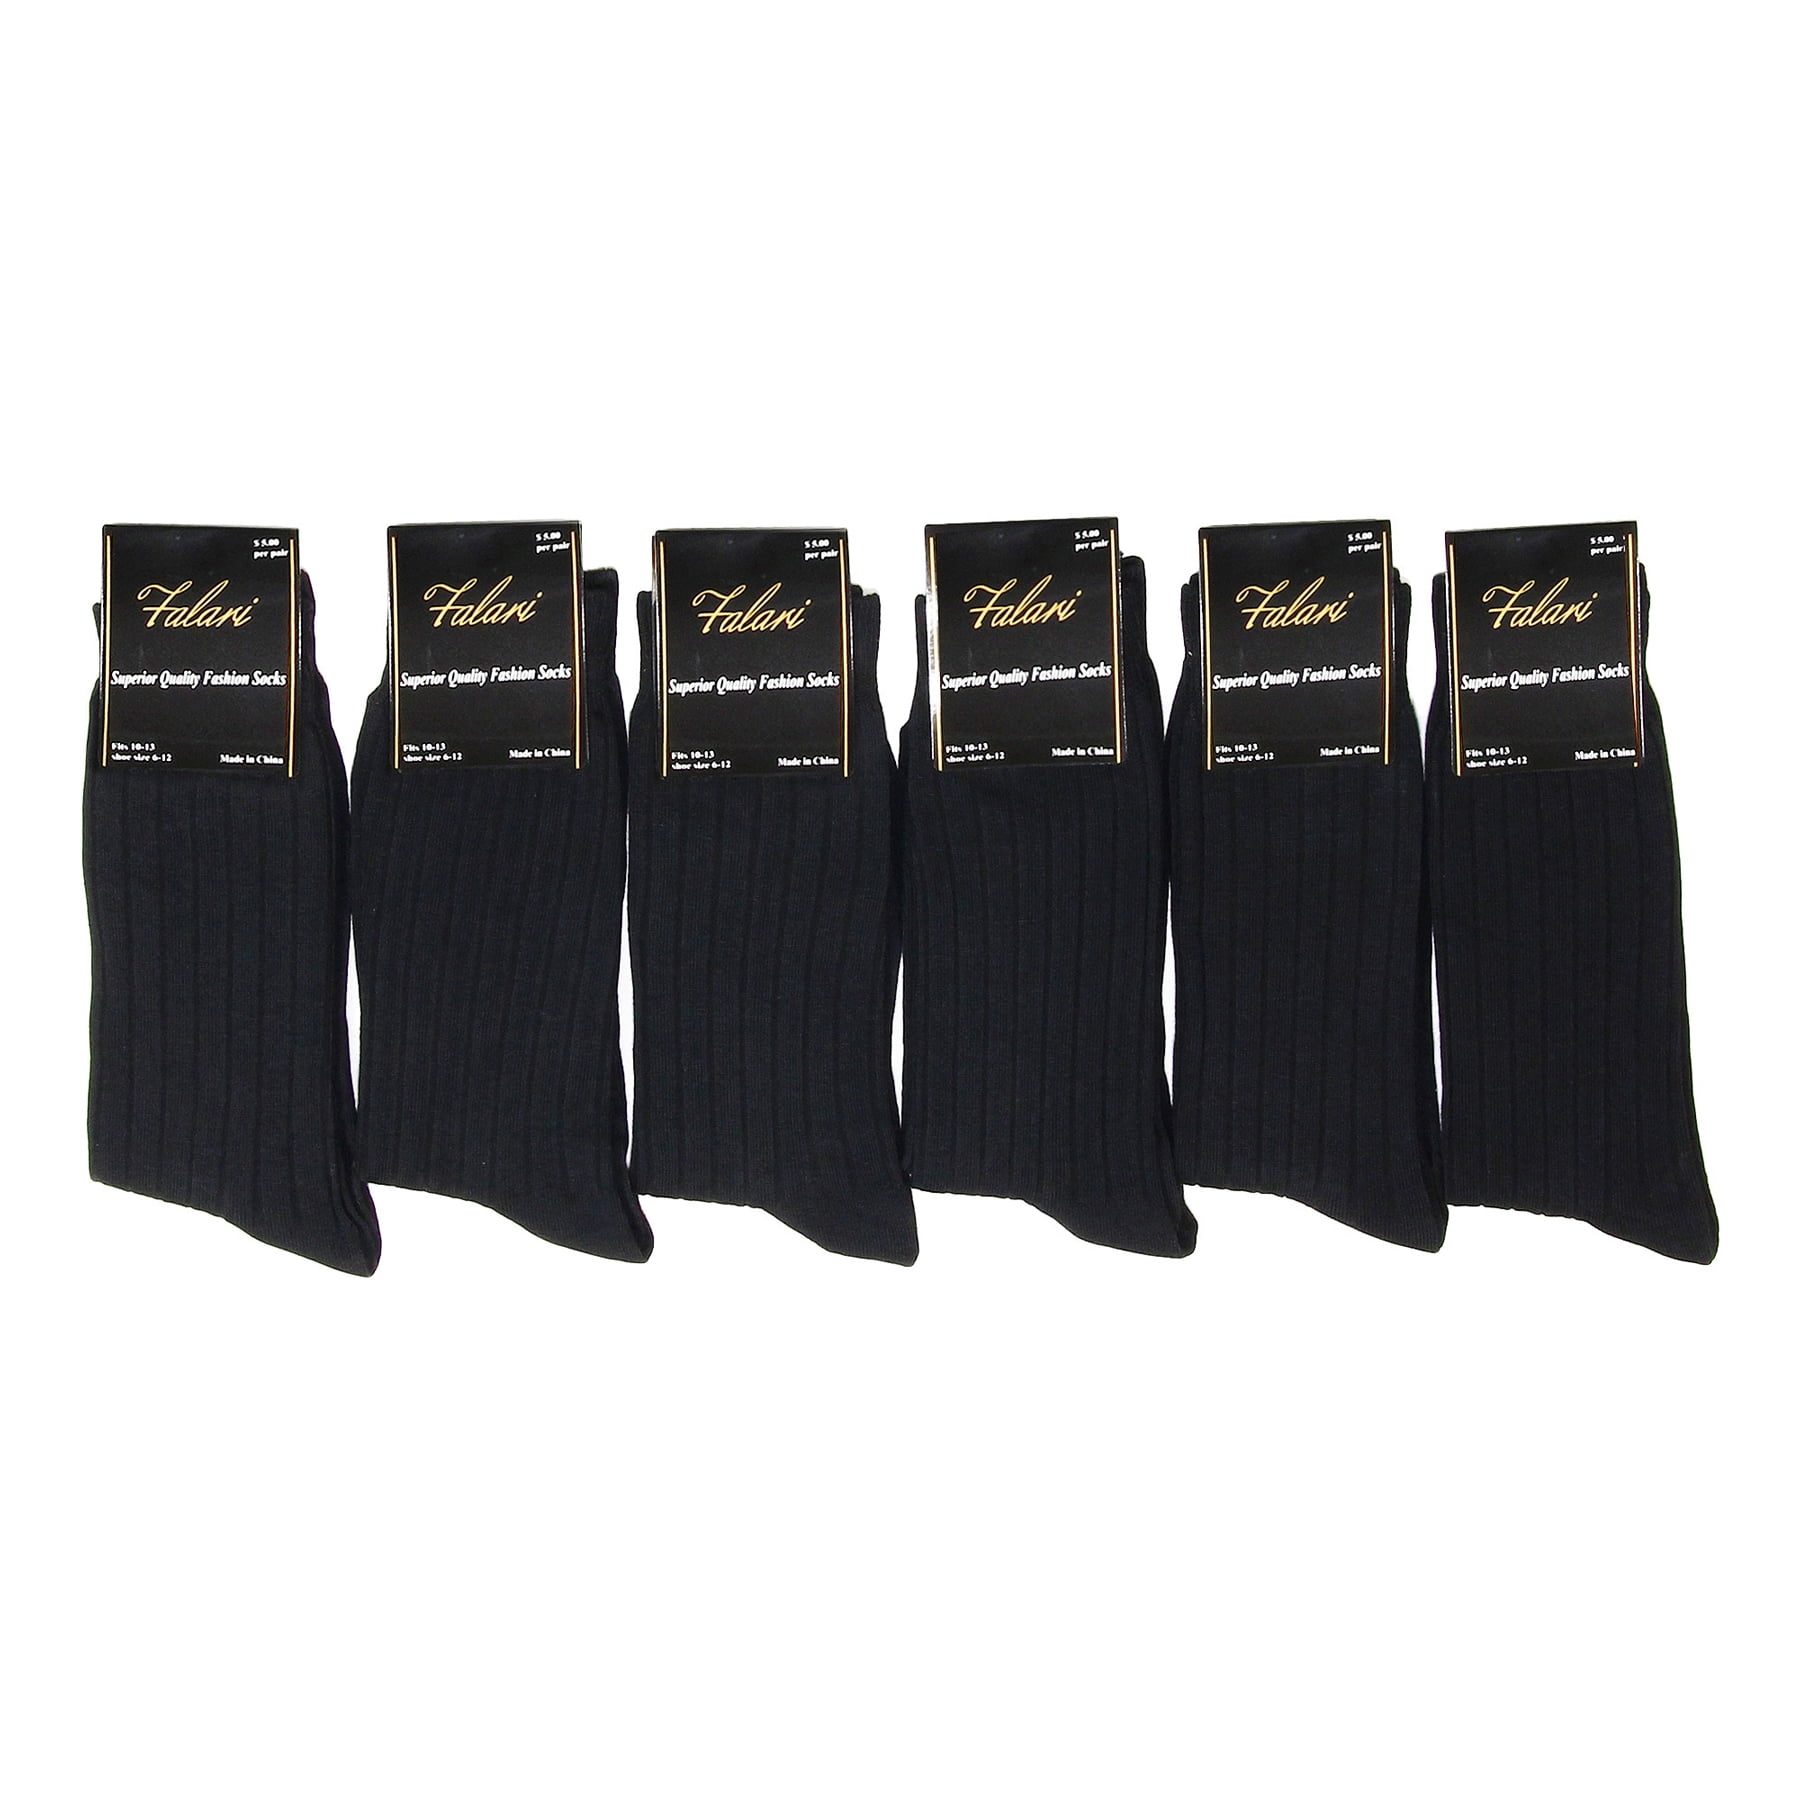 6 12 Pairs Crew Casual Dress Socks Solid Black Polyester Plain Ribbed Mens 10-13 